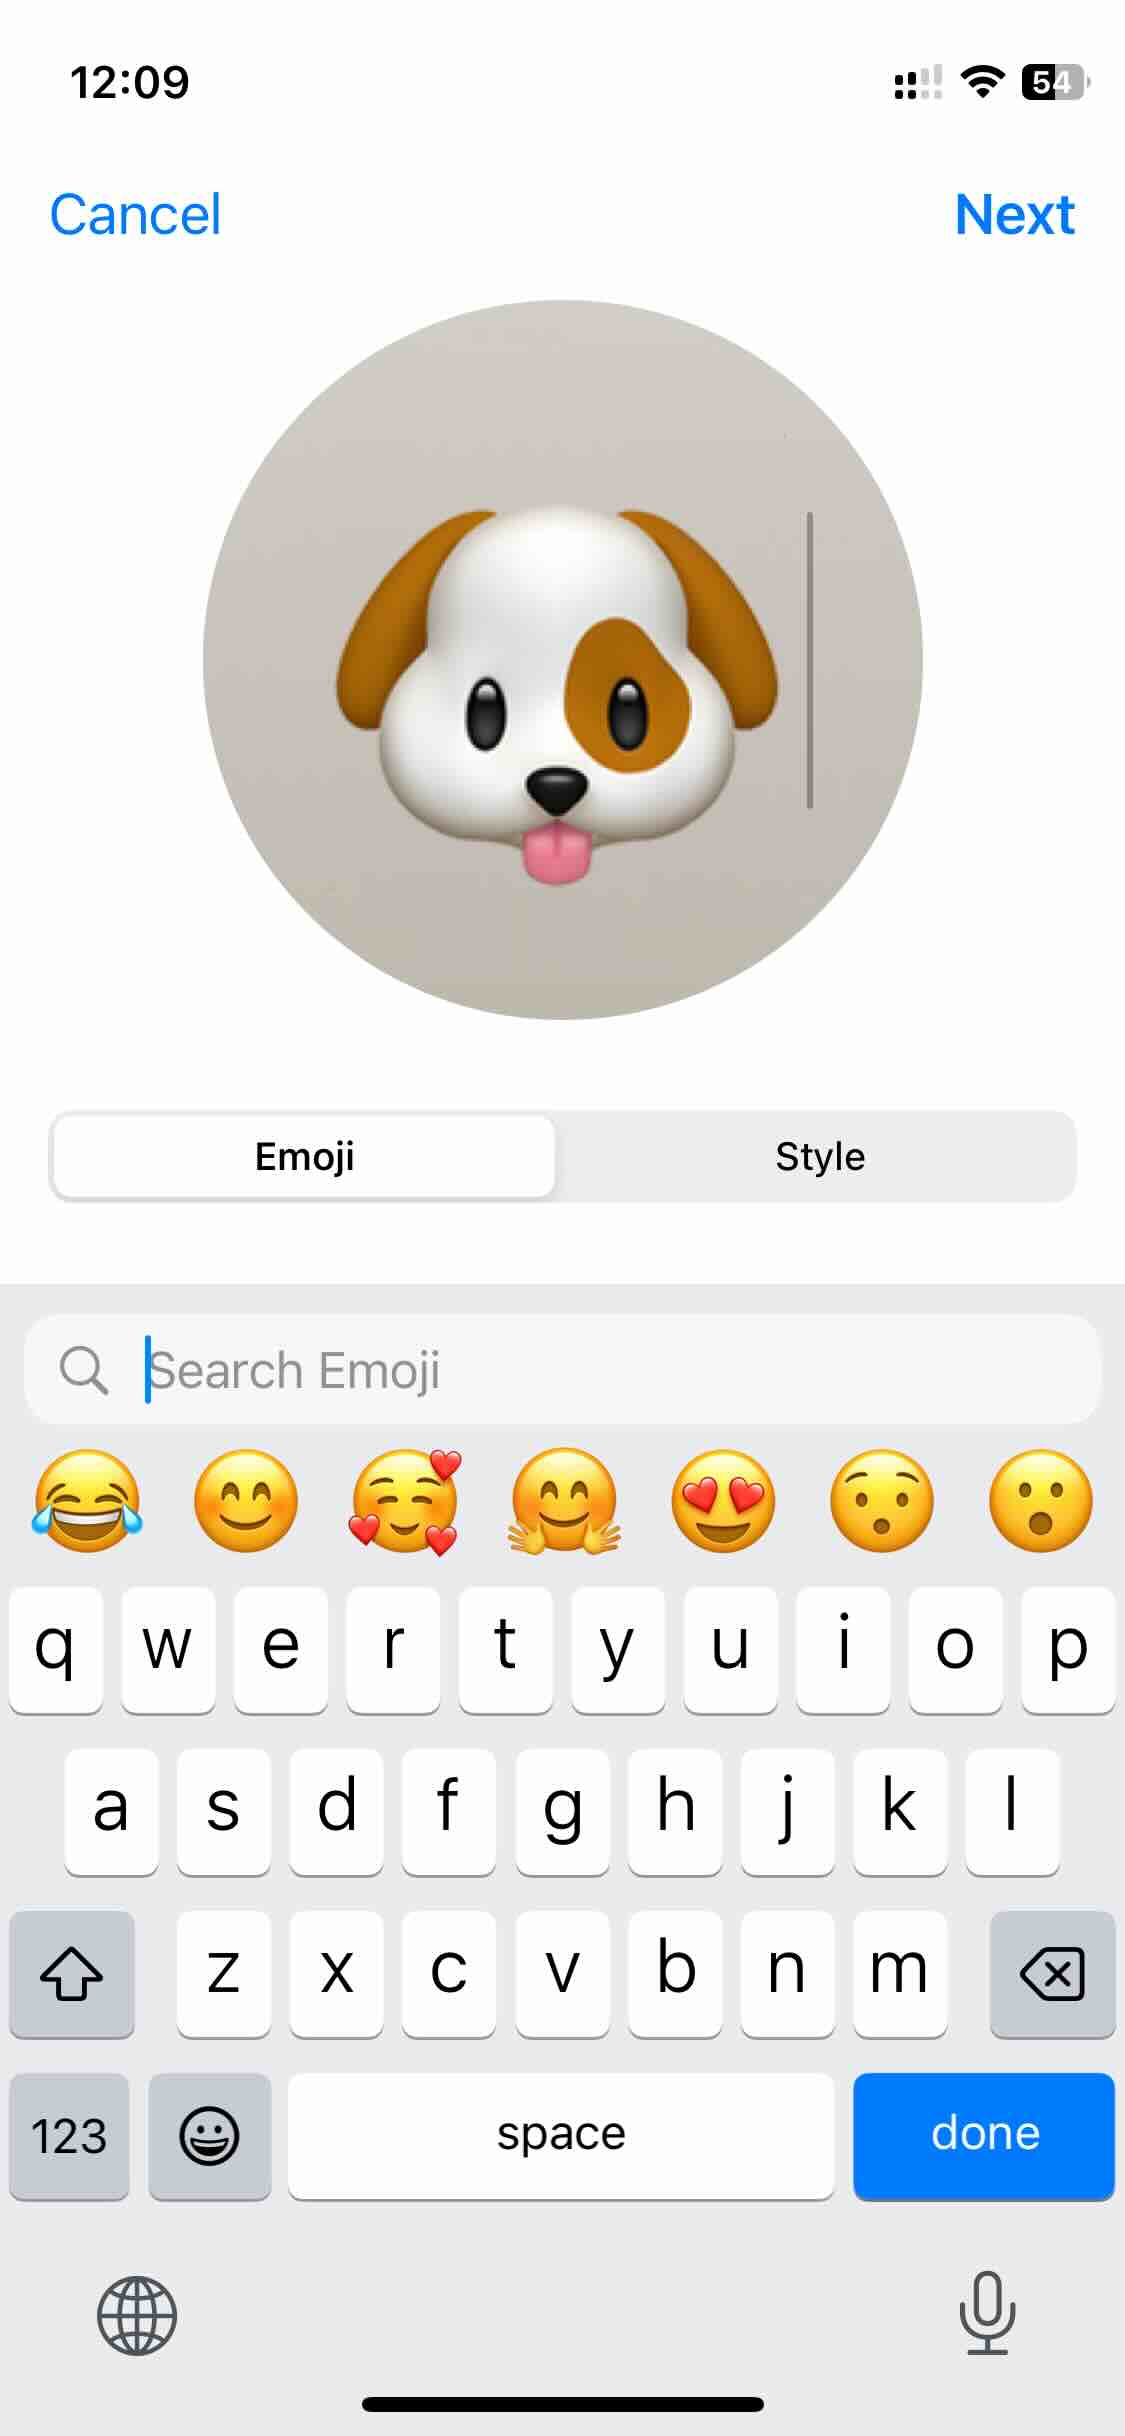 6 - Set an Emoji for Contact Posters